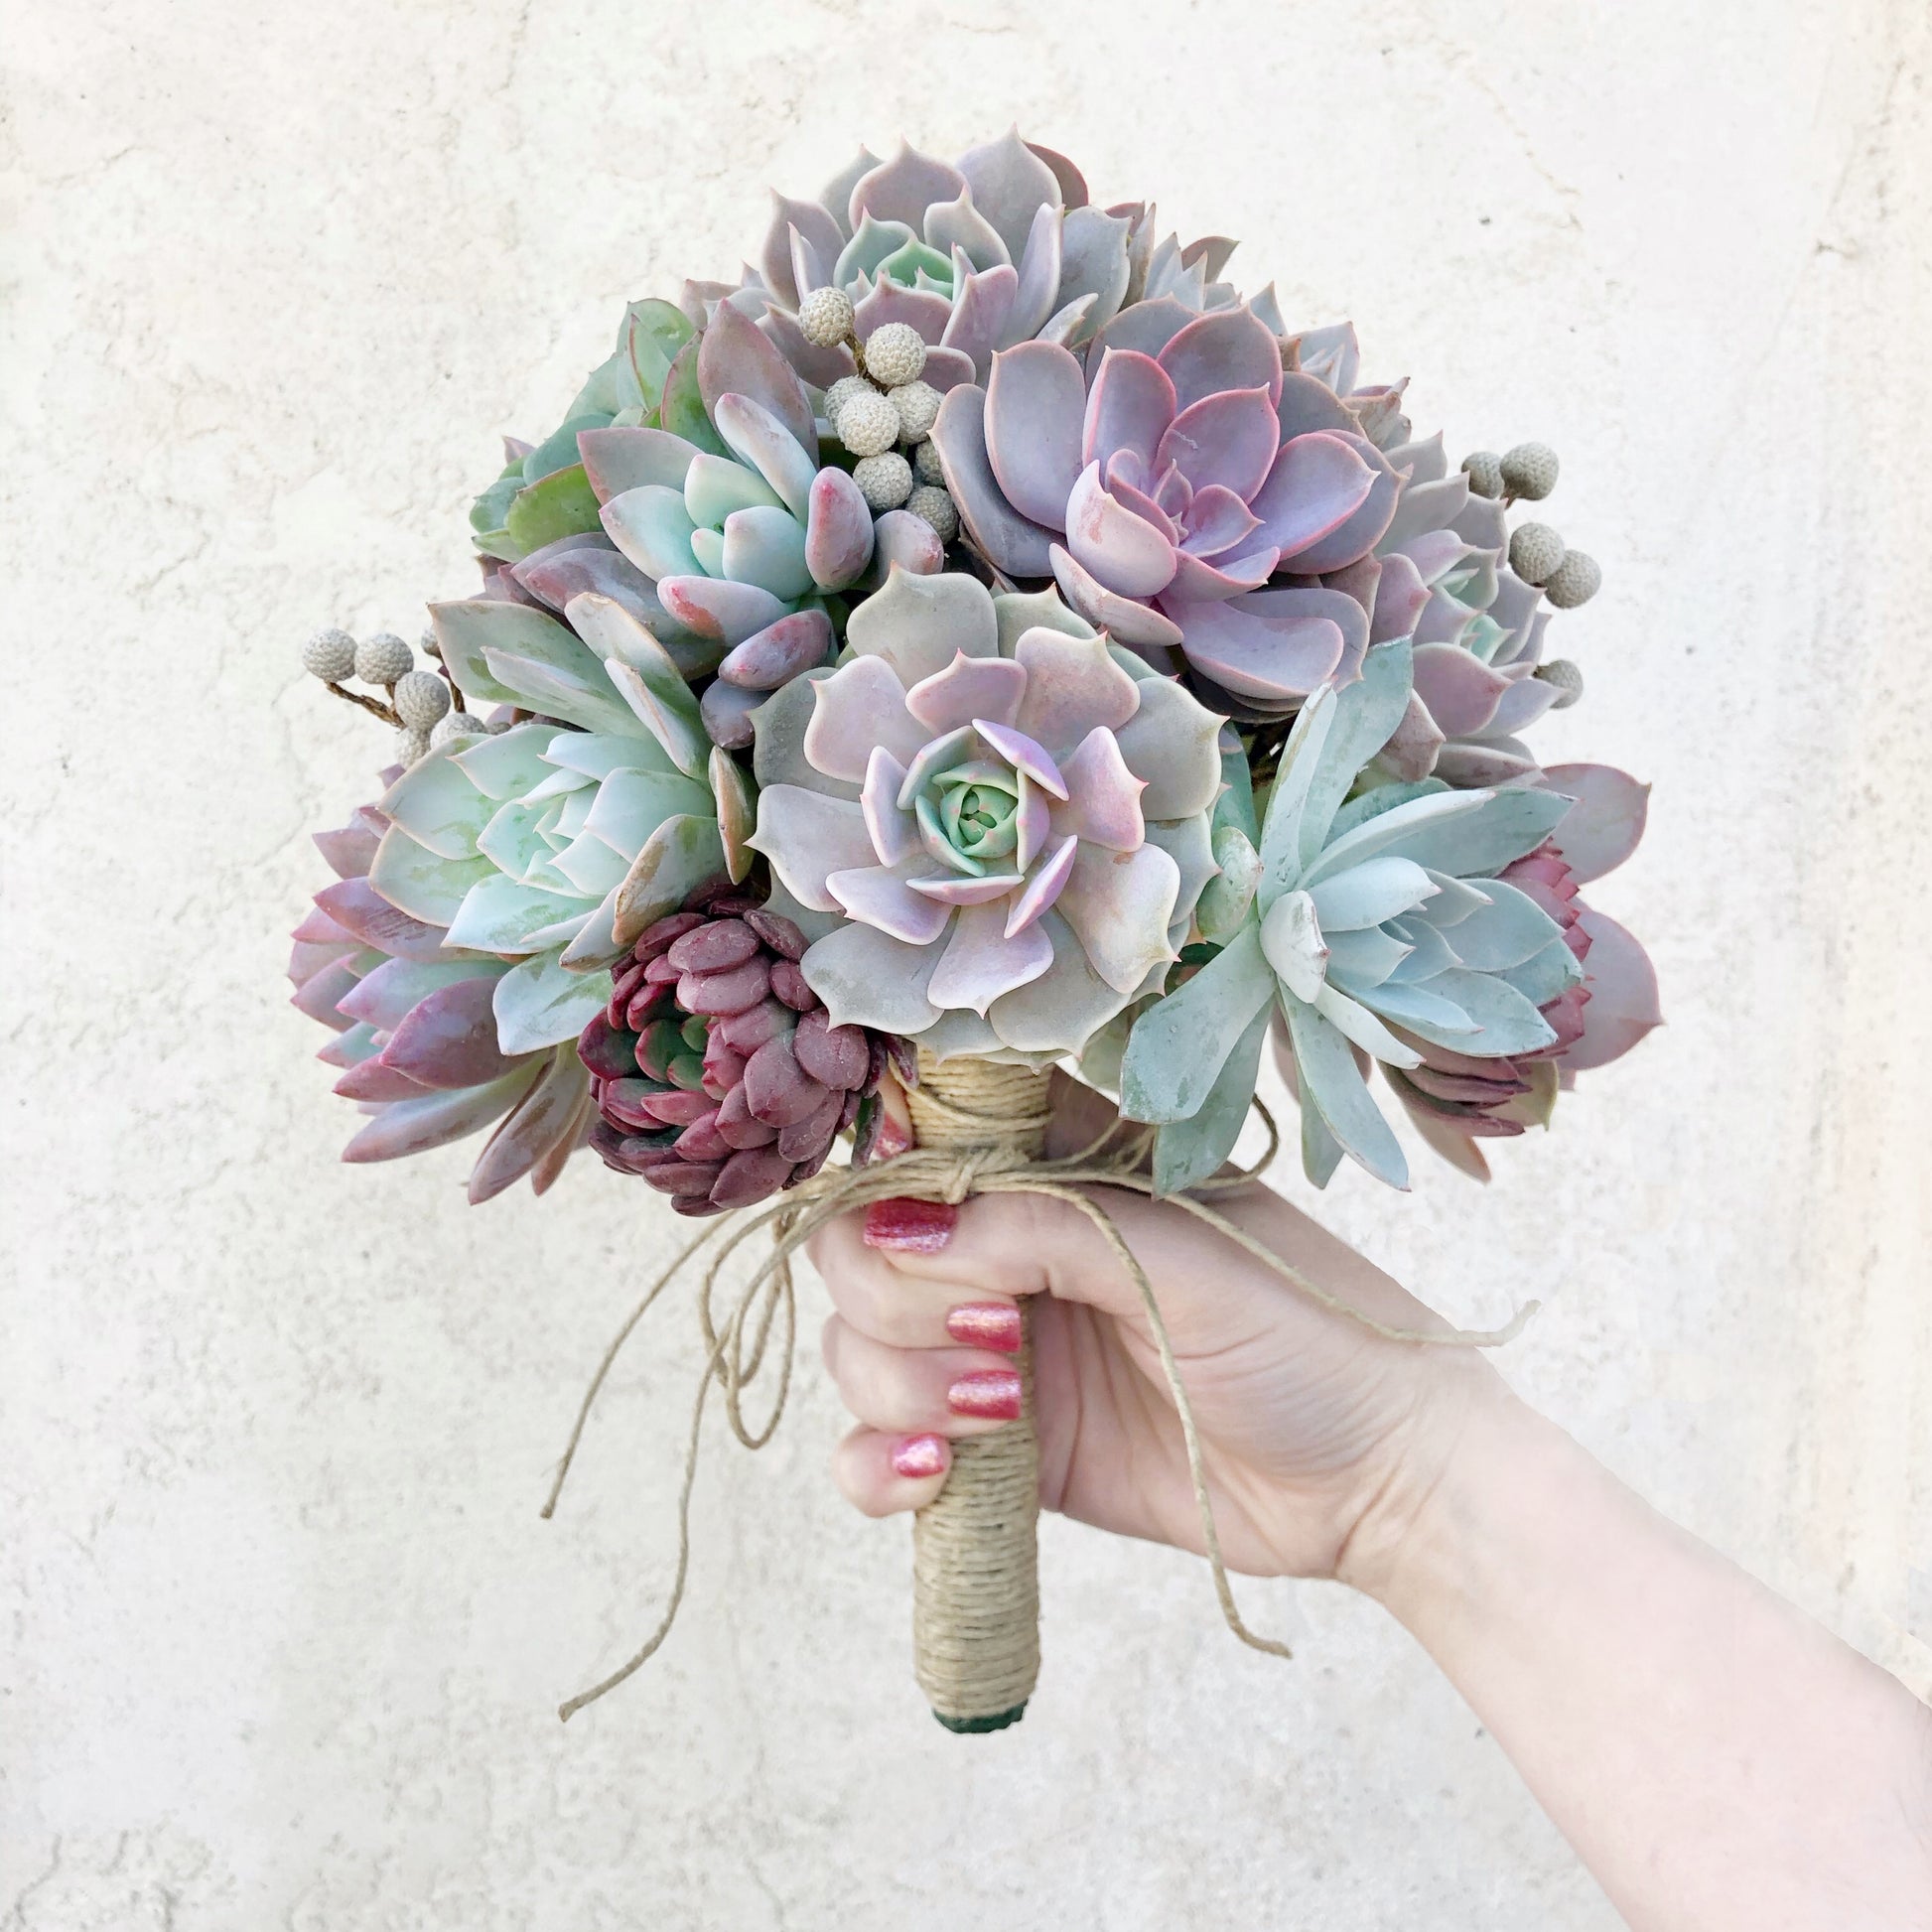 DIY bridal bouquets and wedding guest favors with colorful floral pins